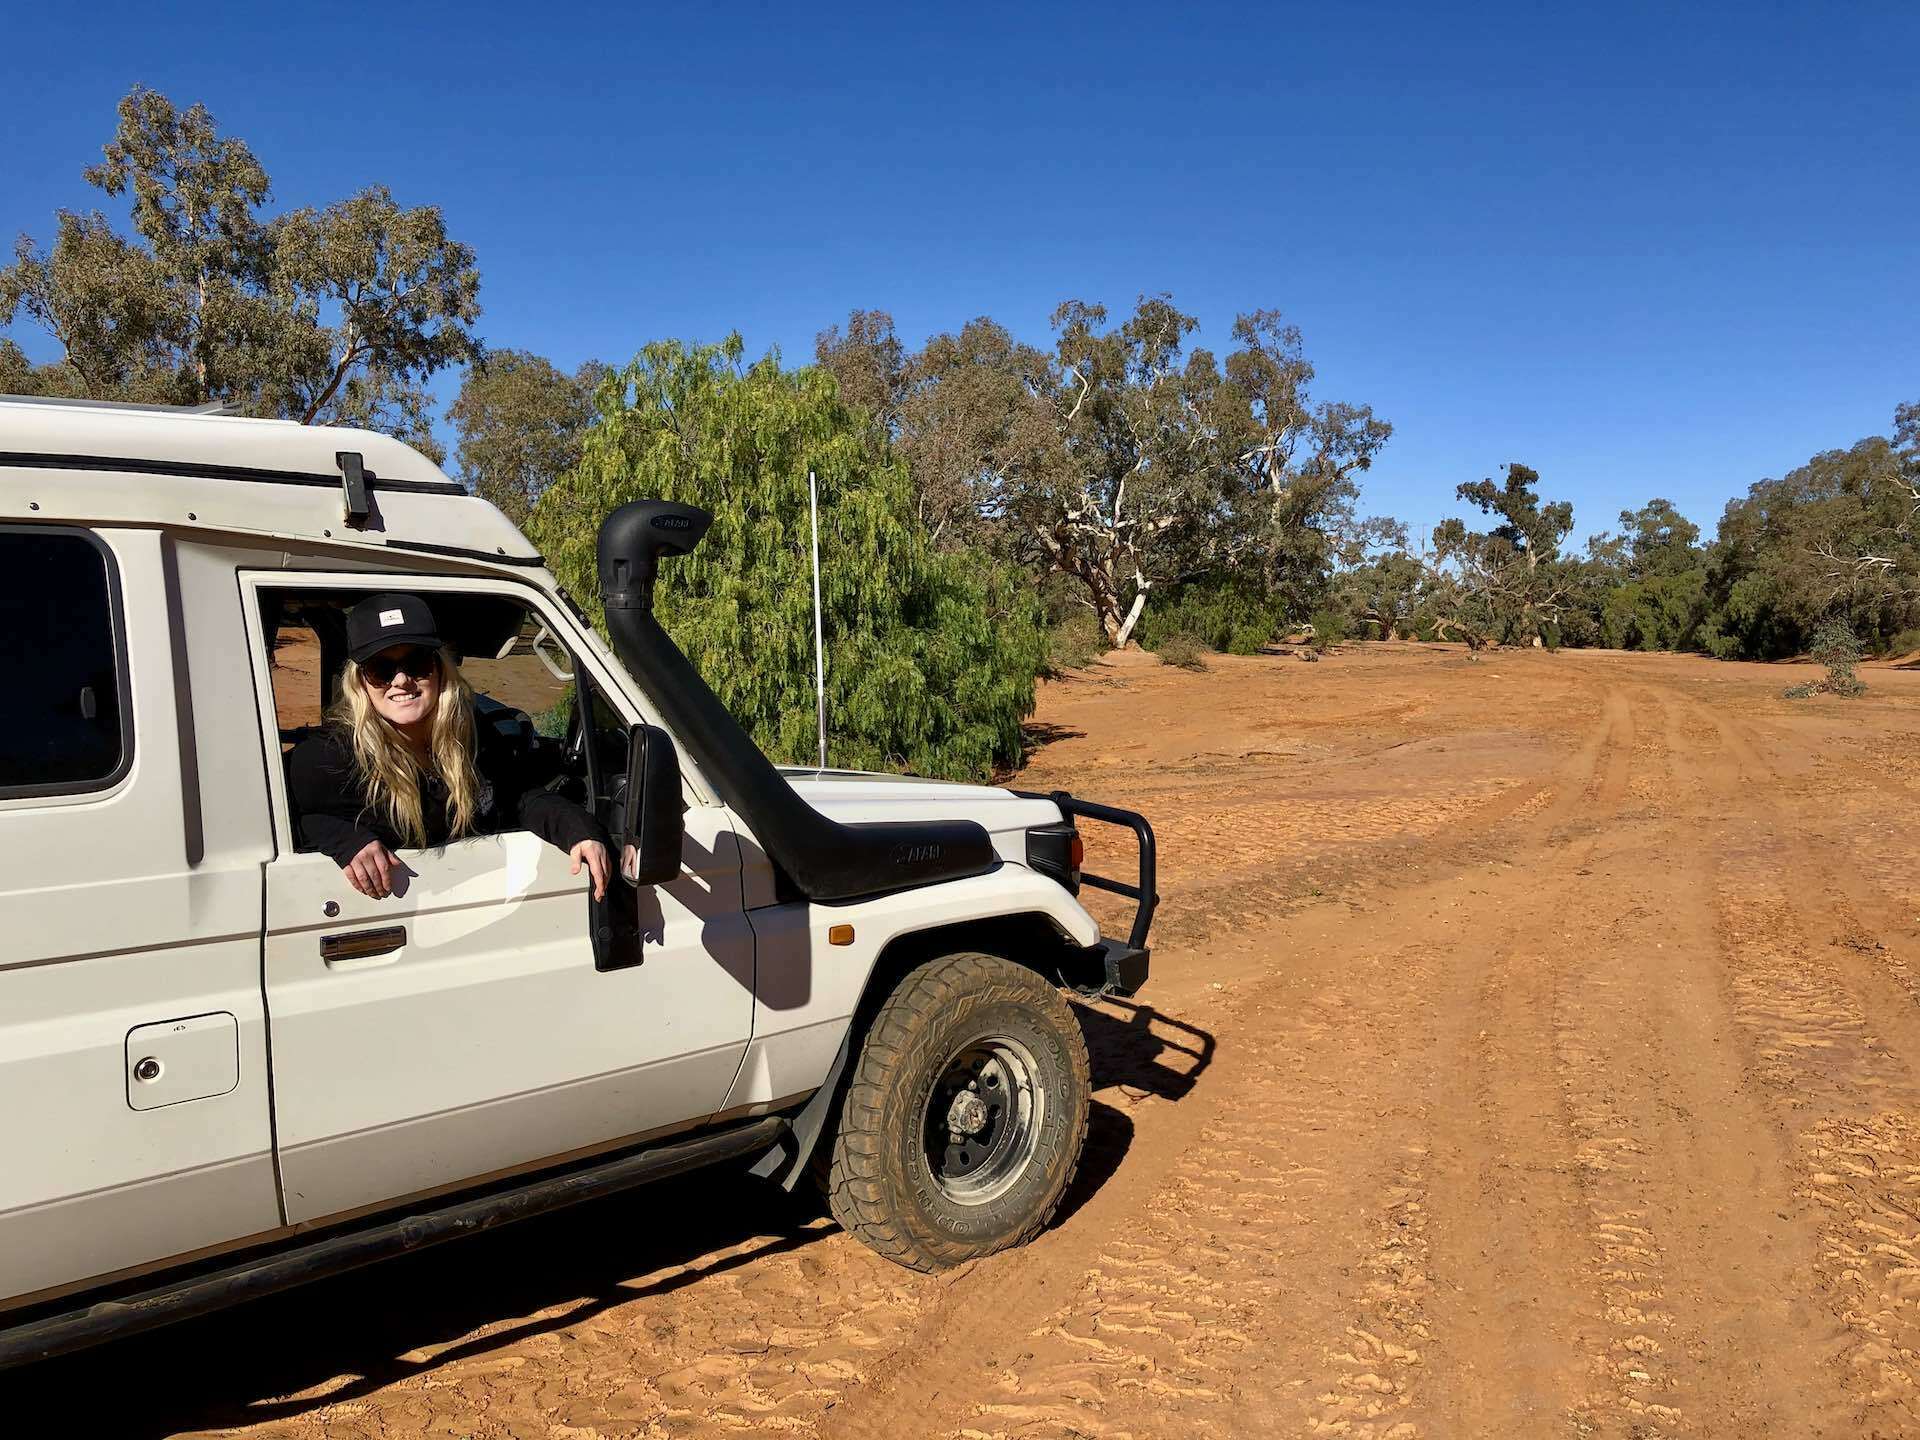 visit outback nsw